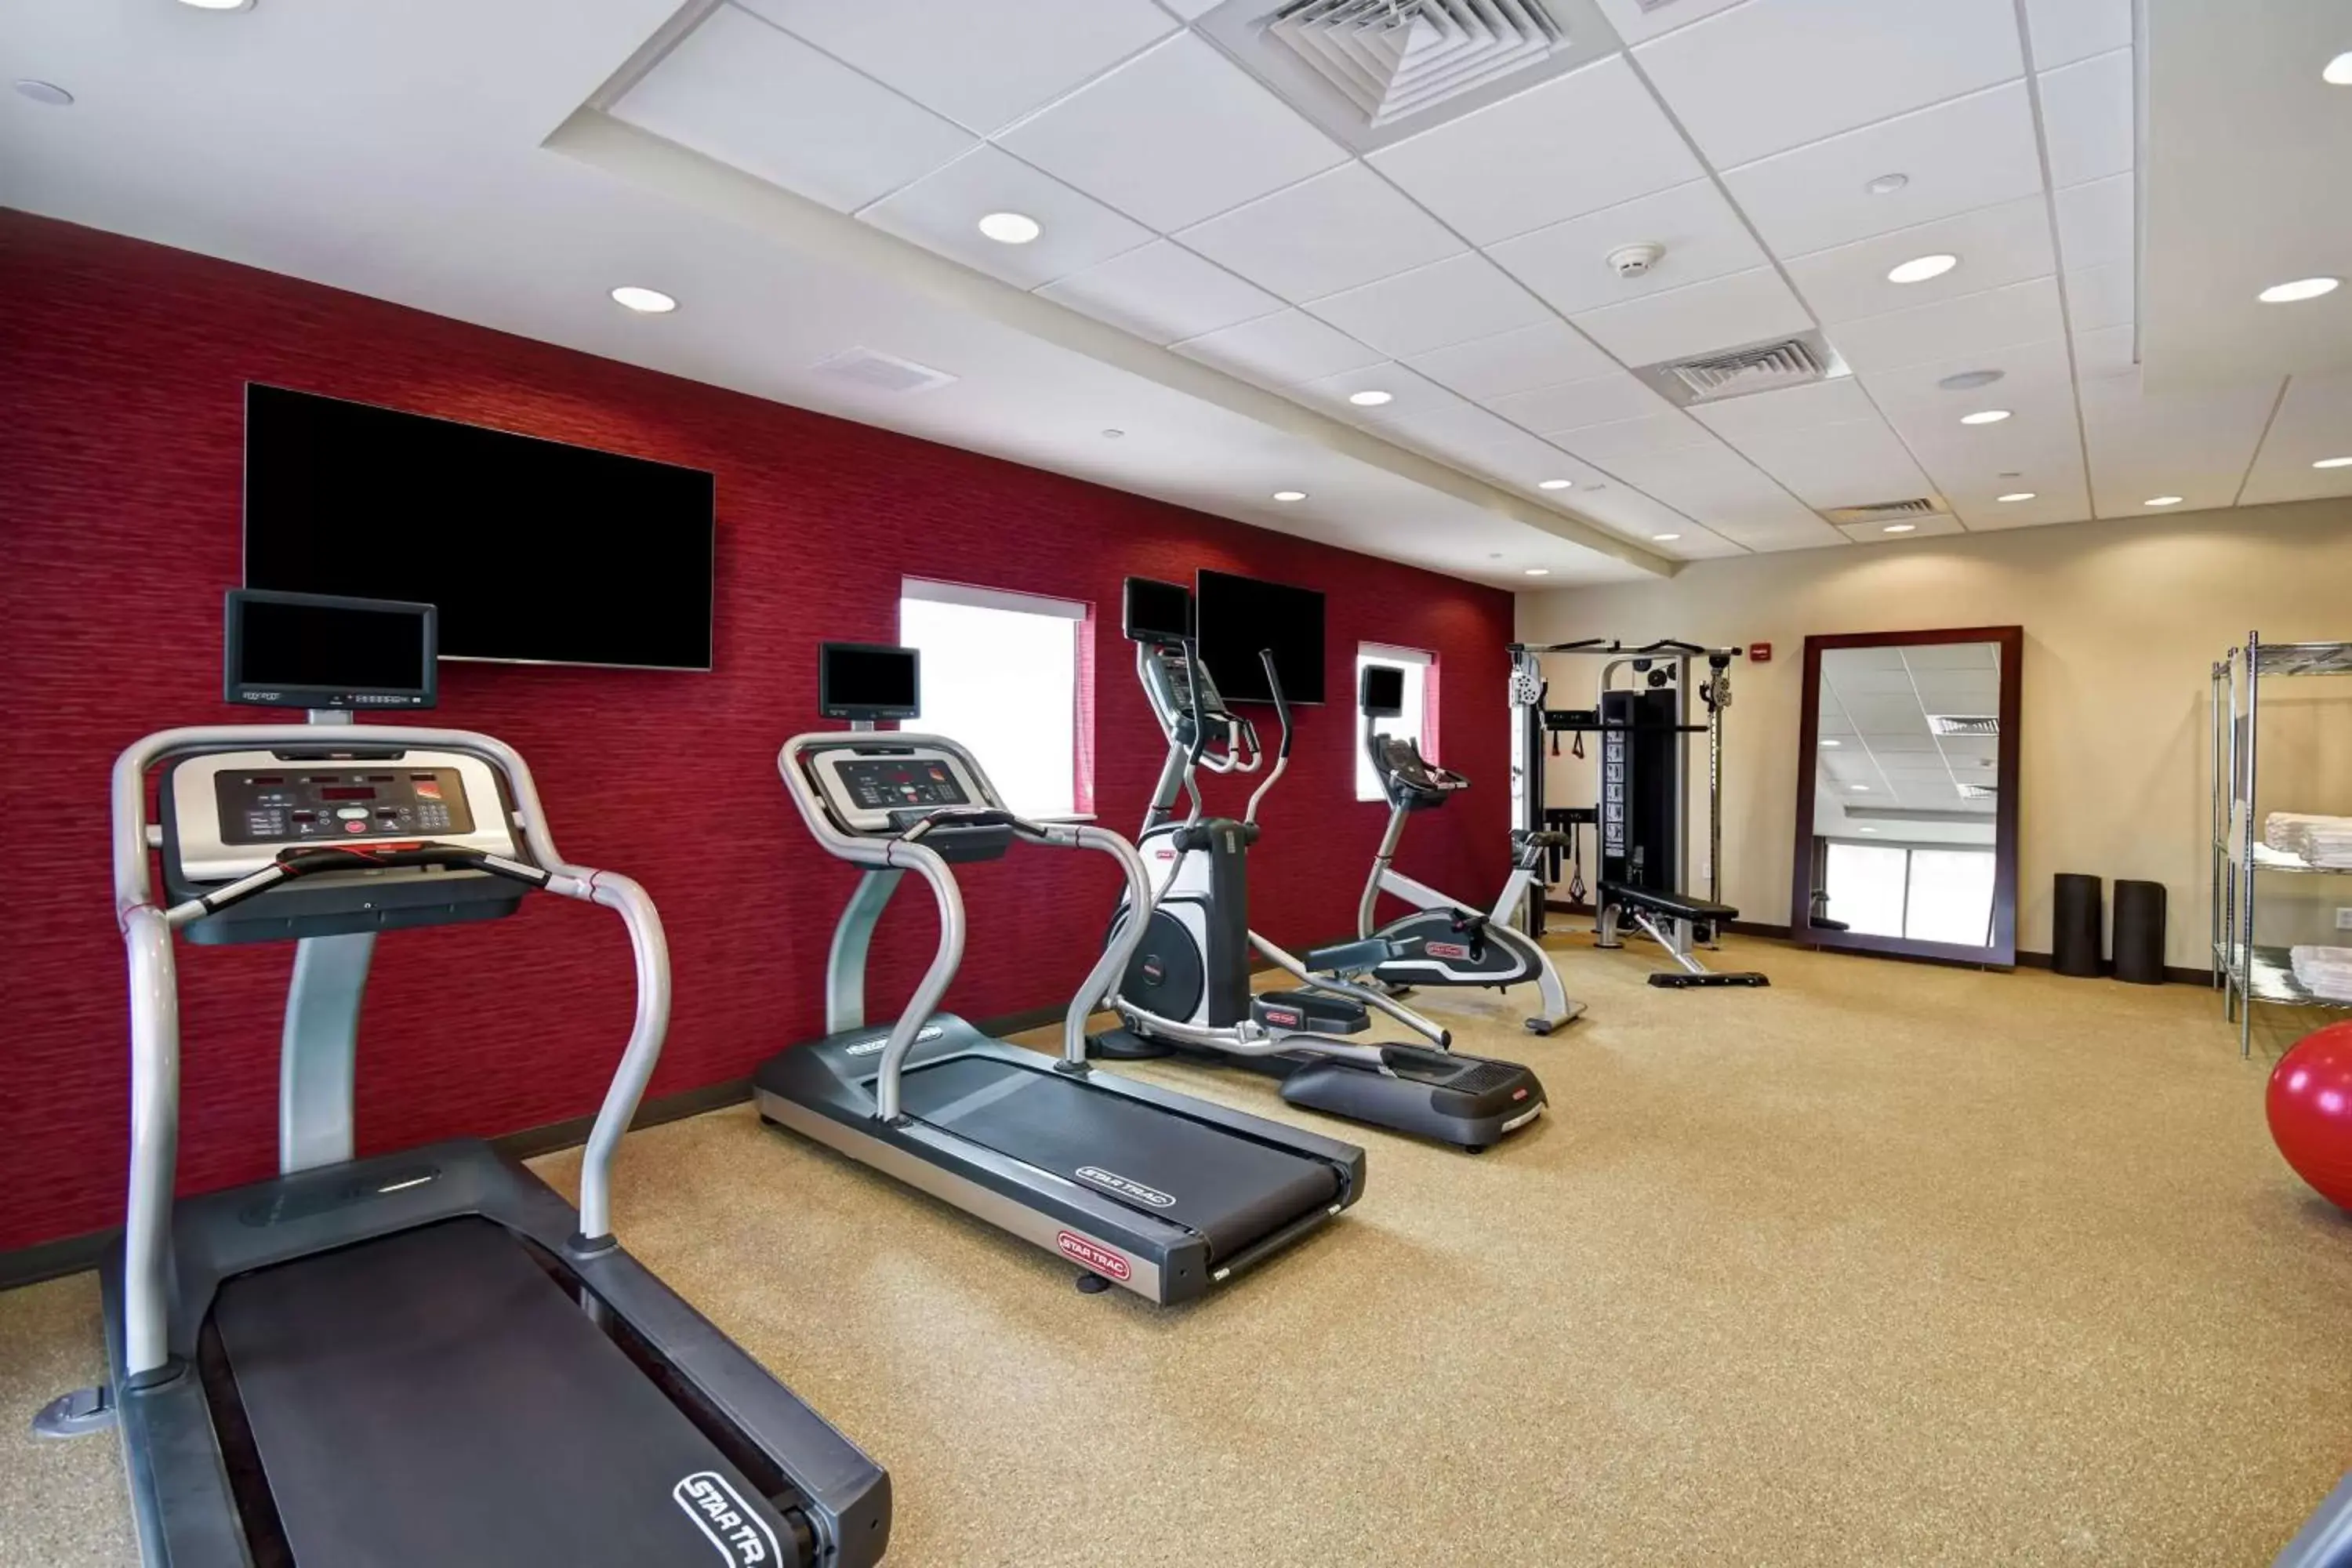 Fitness centre/facilities, Fitness Center/Facilities in Home2 Suites Mechanicsburg